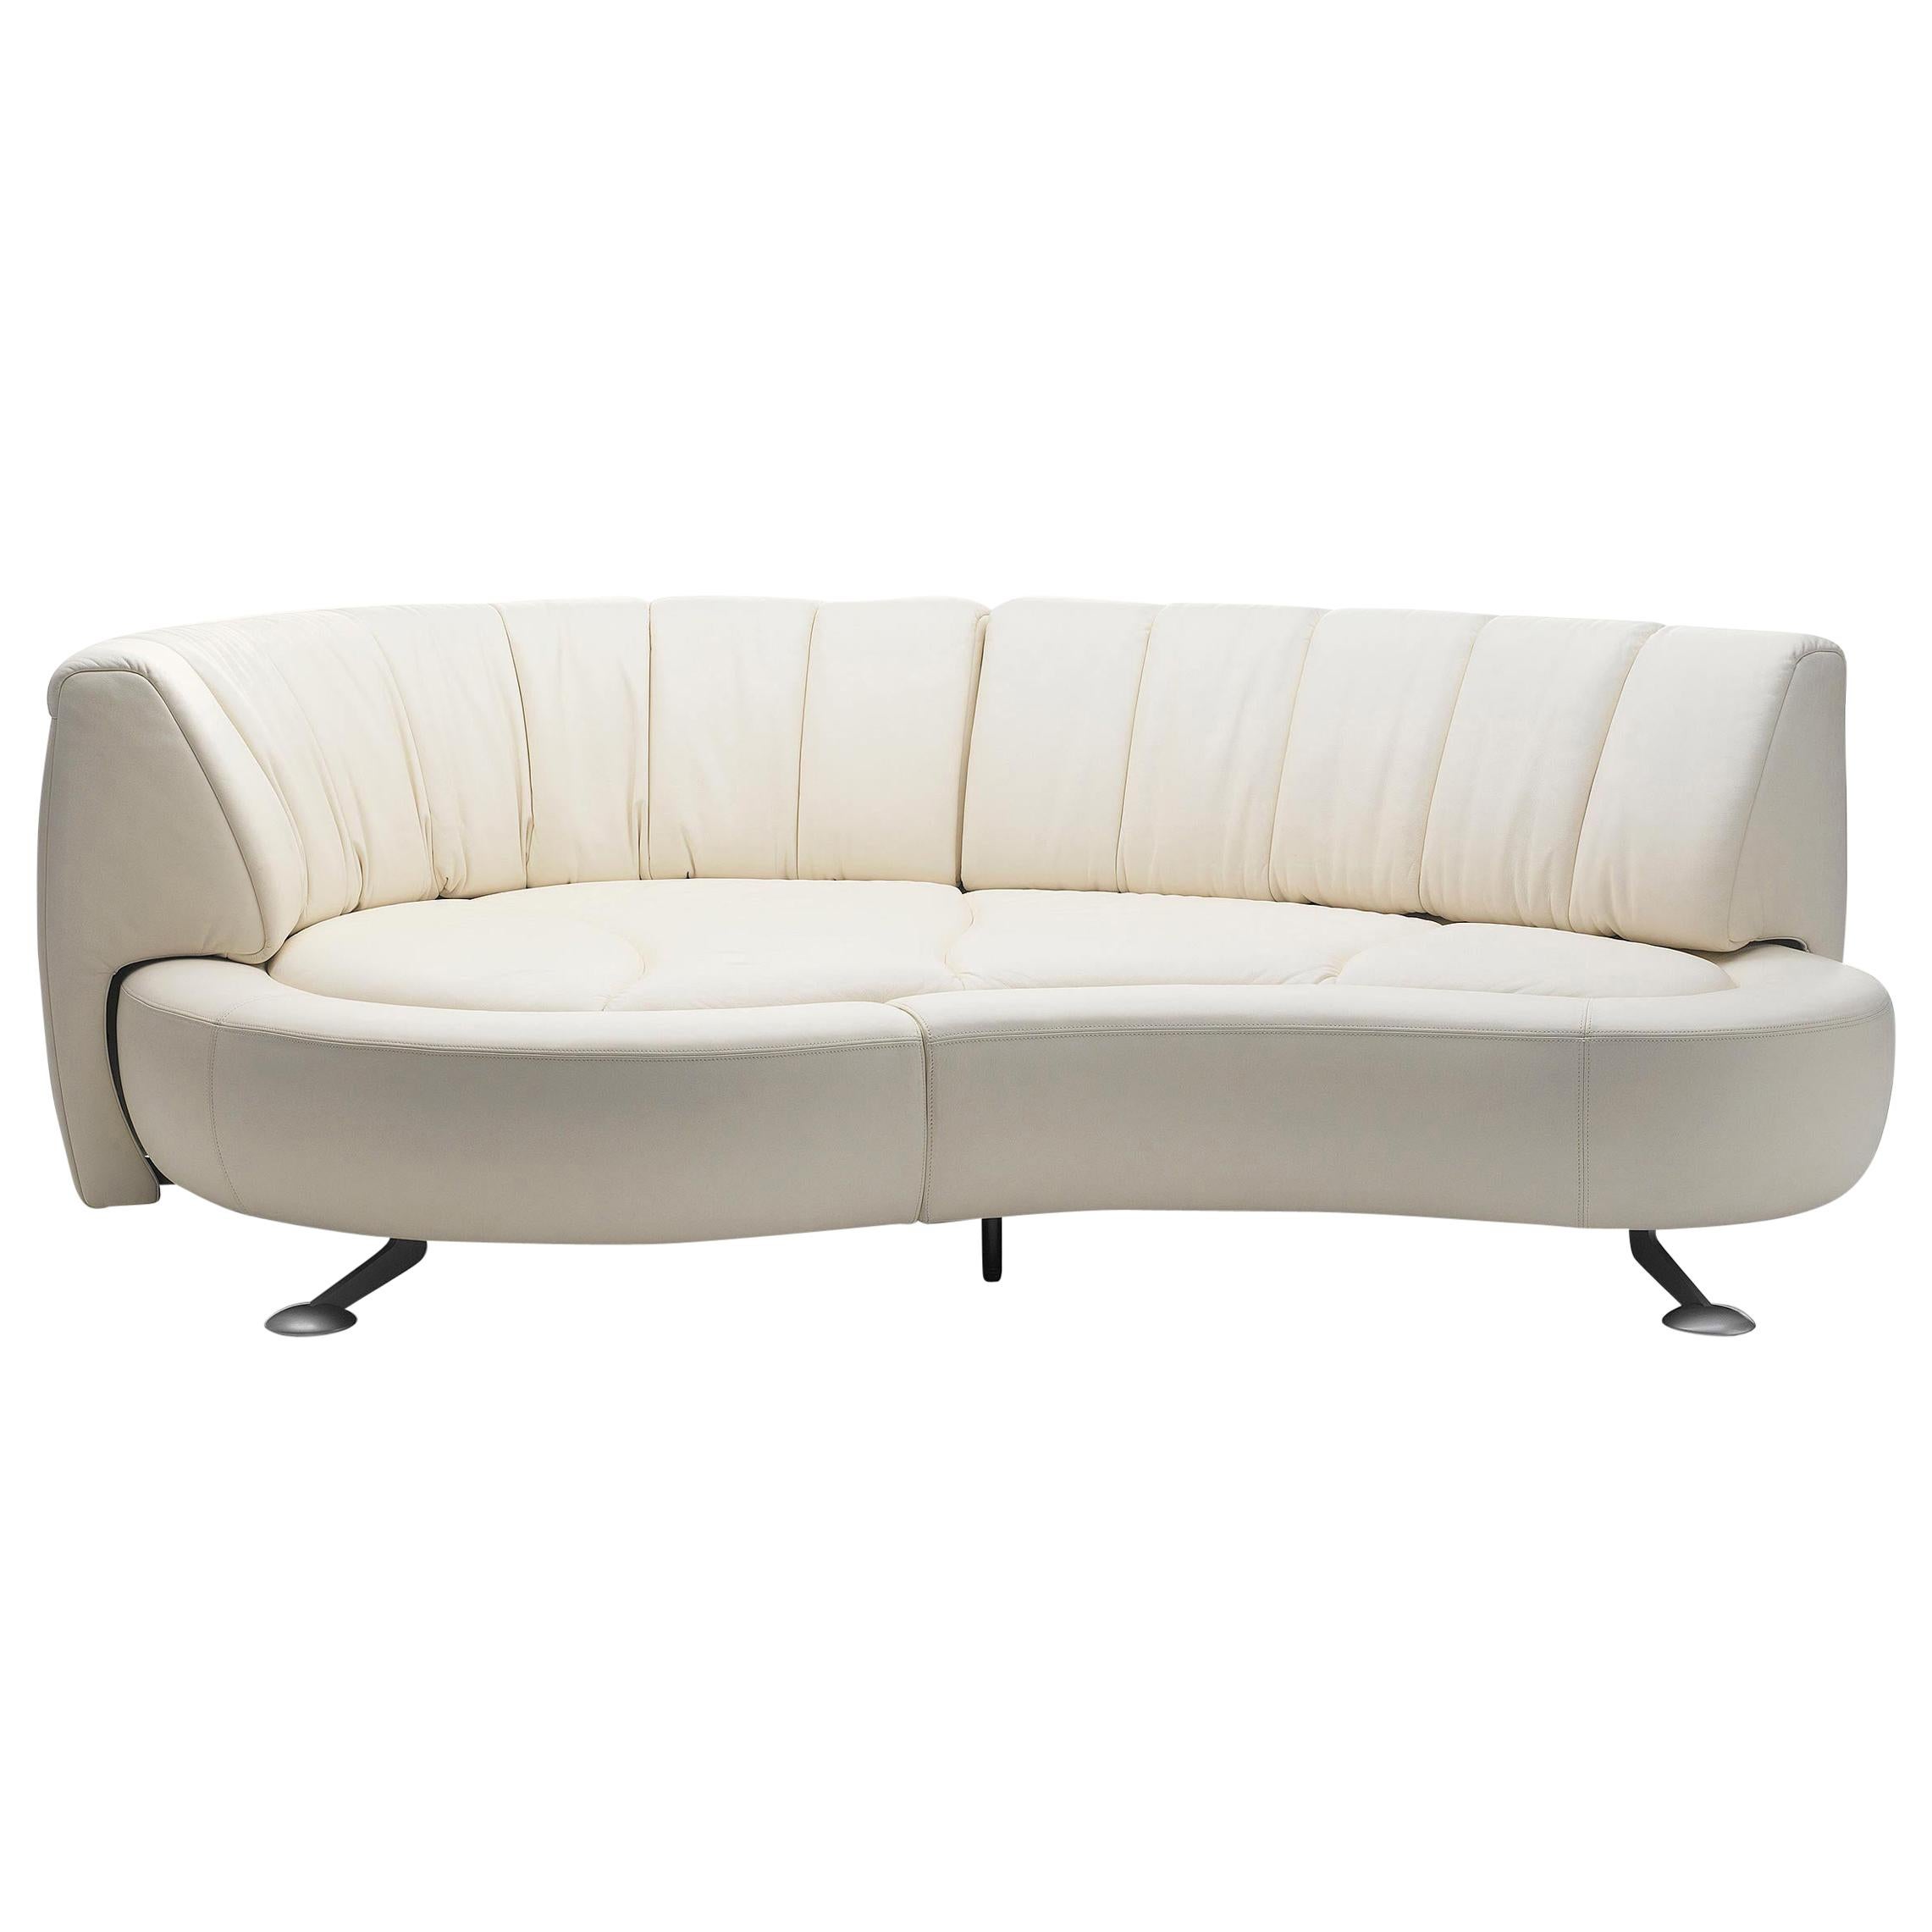 De Sede DS-164 Right Sofa Bed in Off White Upholstery by Hugo de Ruiter